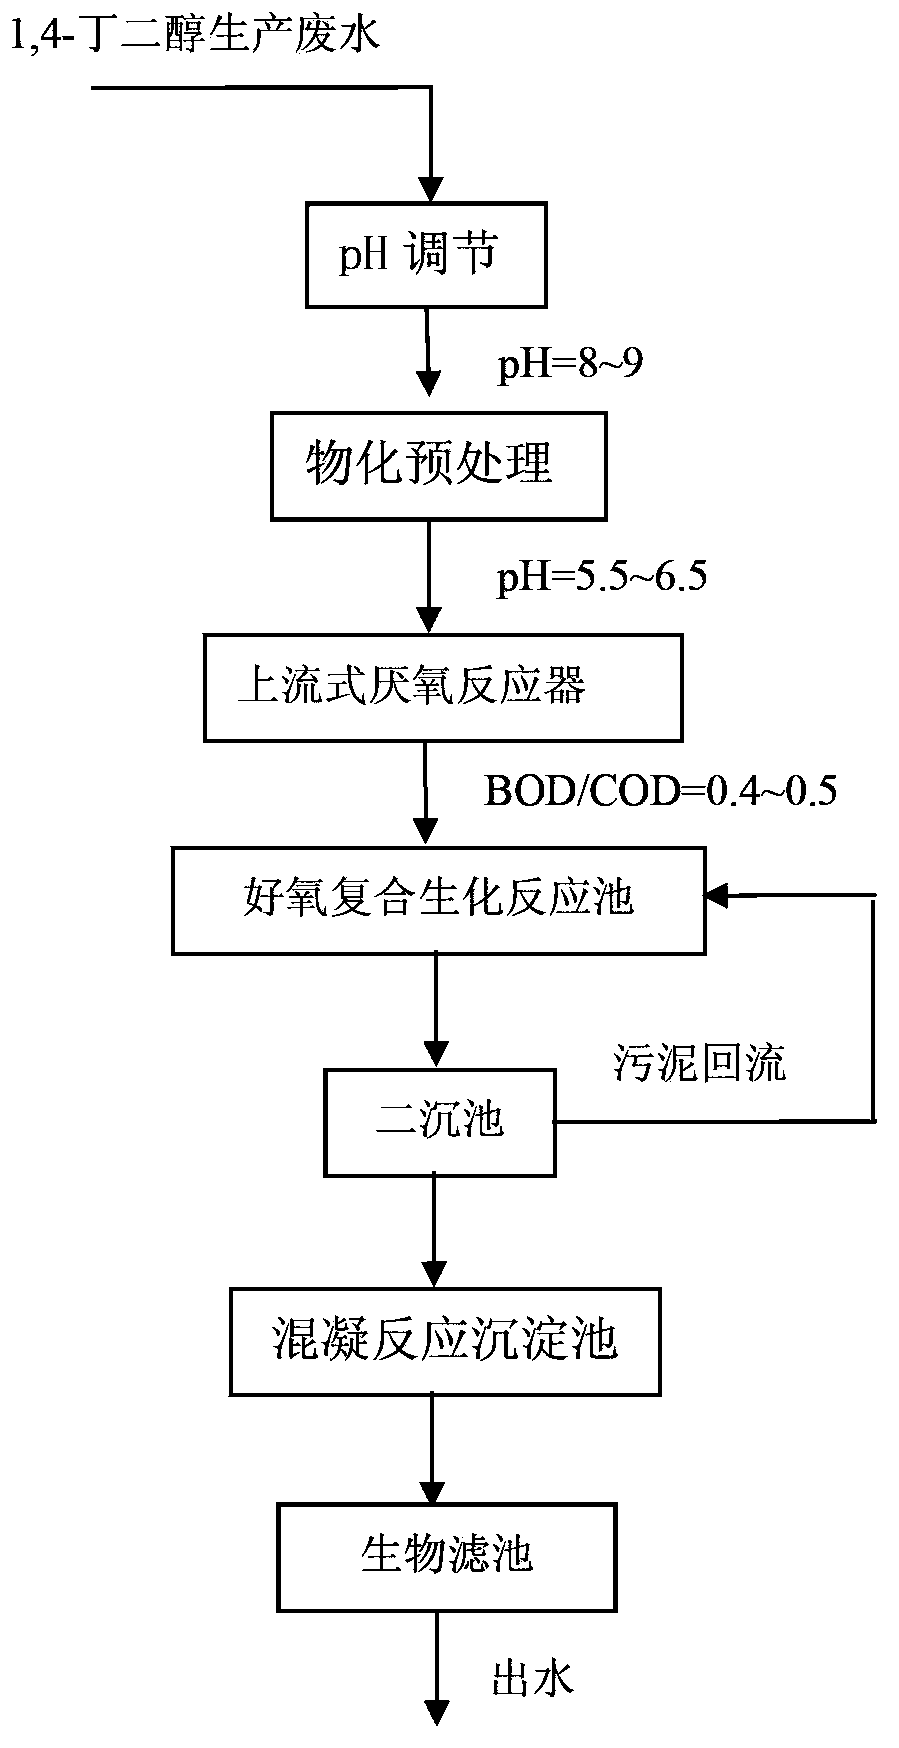 Combined treatment method of 1,4-butanediol production wastewater